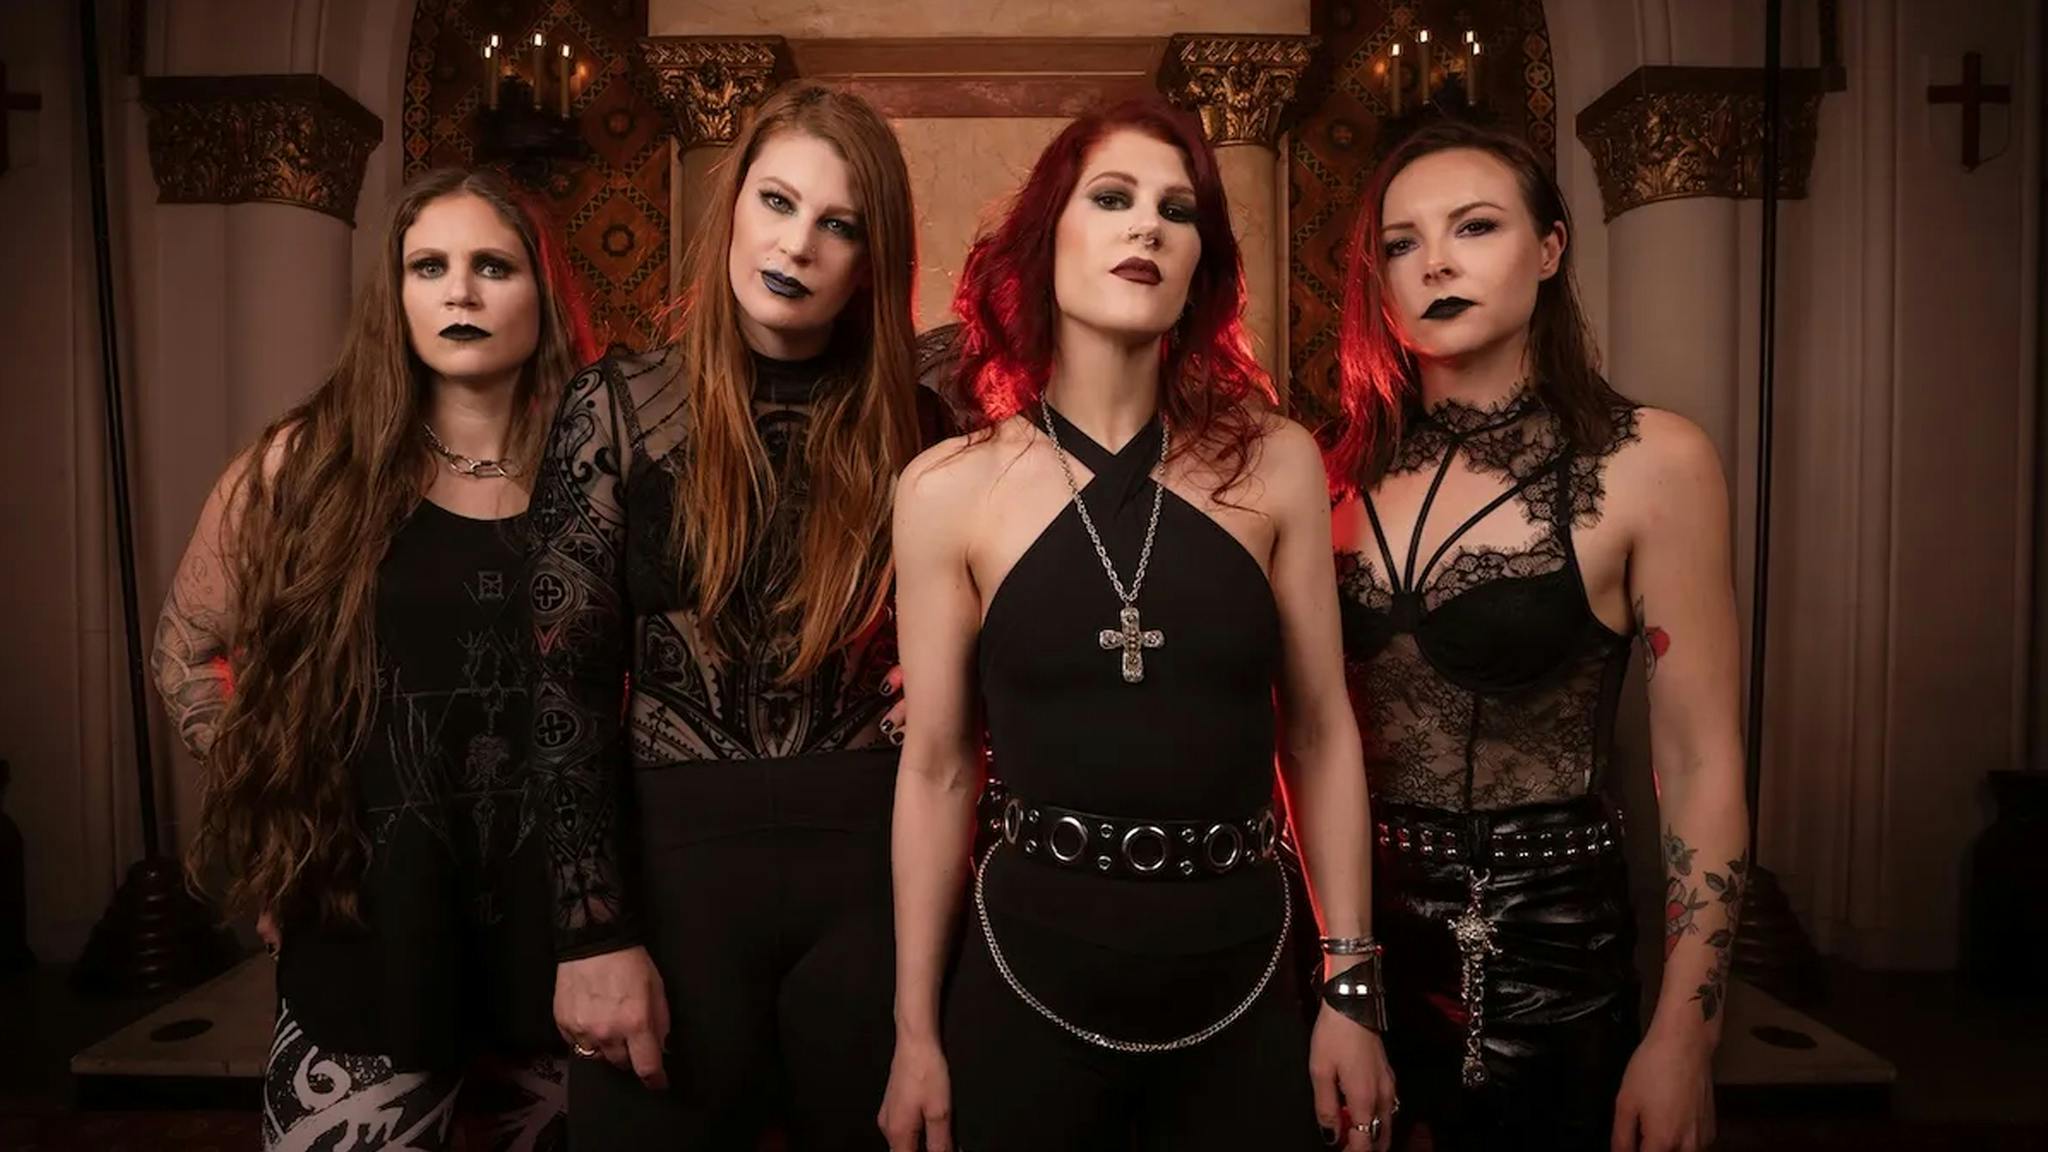 Kittie announce first new album in 13 years: “We cannot wait for you to lose yourselves in the passion and strength of Fire”